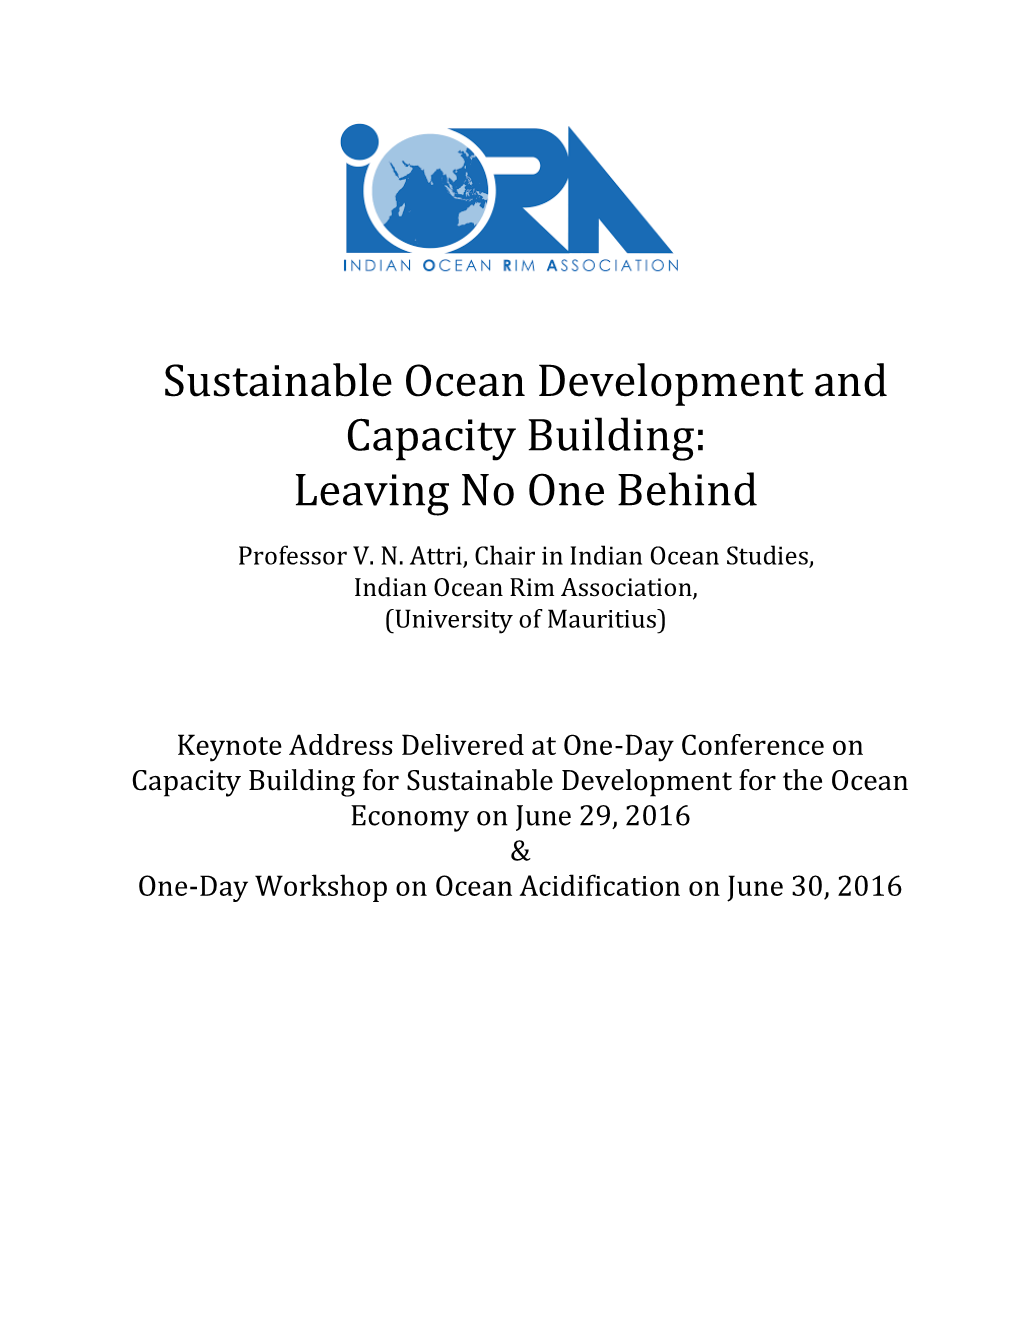 Sustainable Ocean Development and Capacity Building: Leaving No One Behind